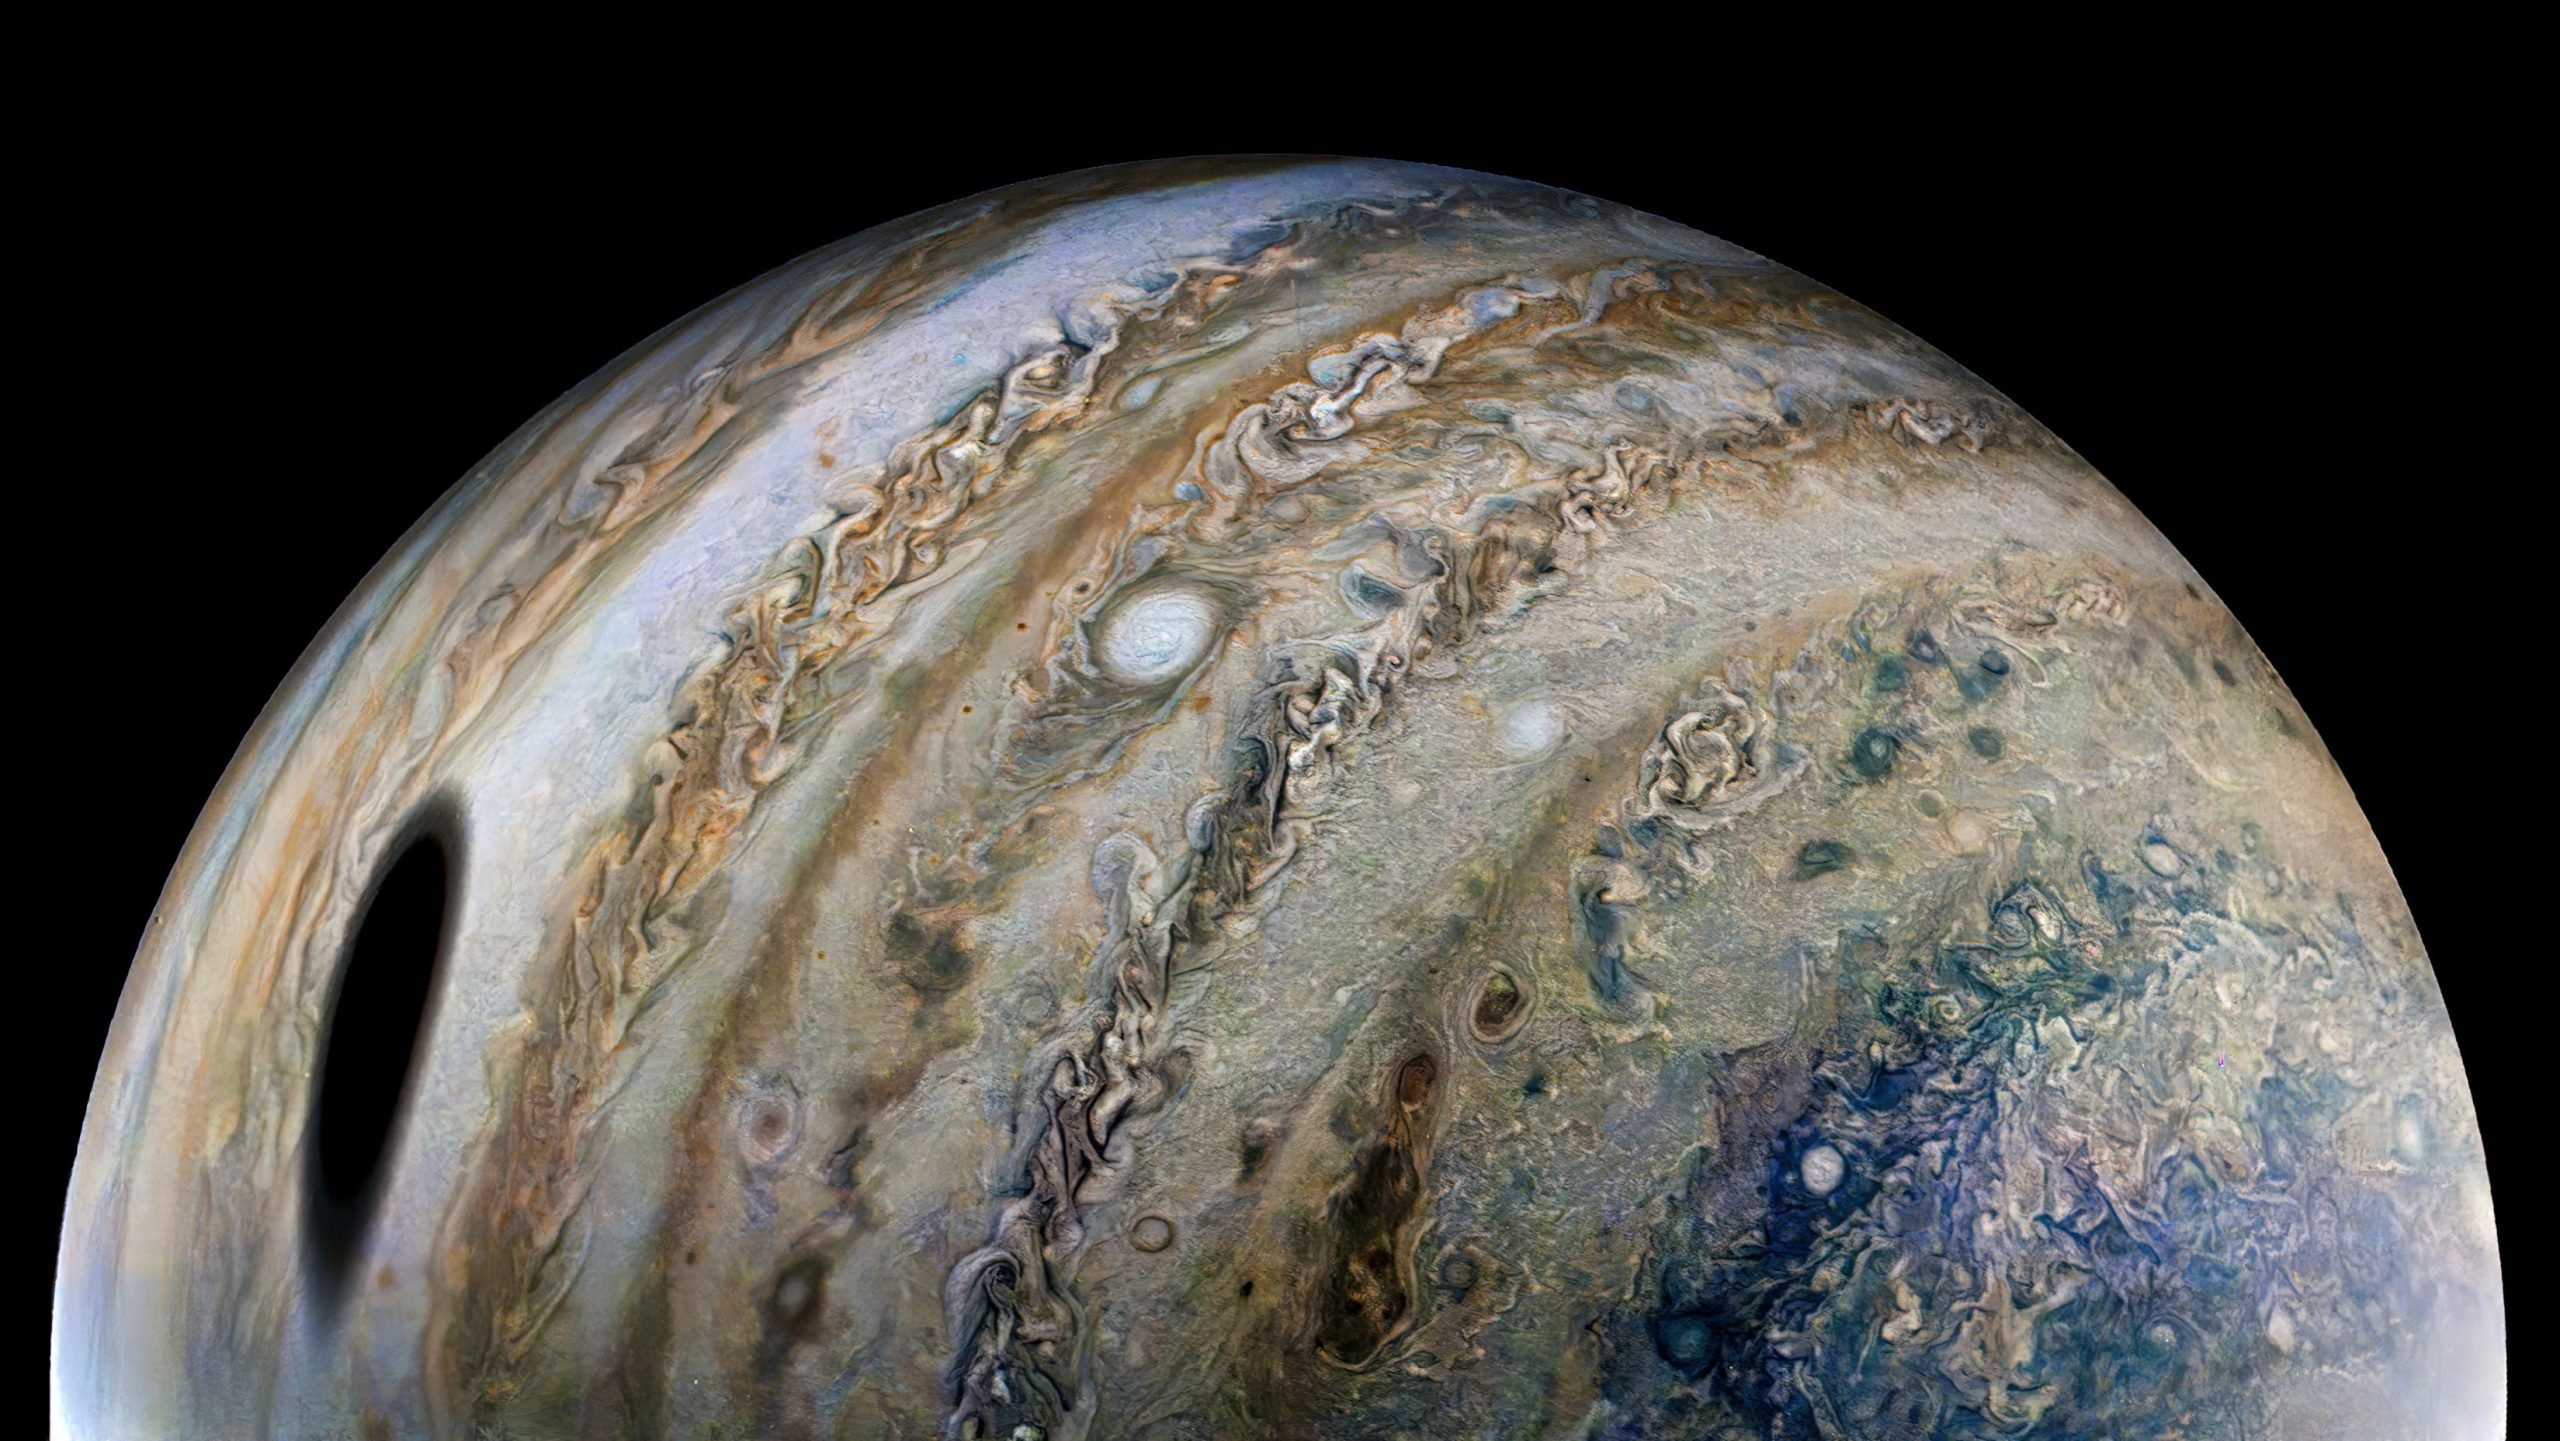 Ganymede Casts a Massive Shadow Across Jupiter in Spectacular New Image From NASA's Juno Spacecraft - SciTechDaily